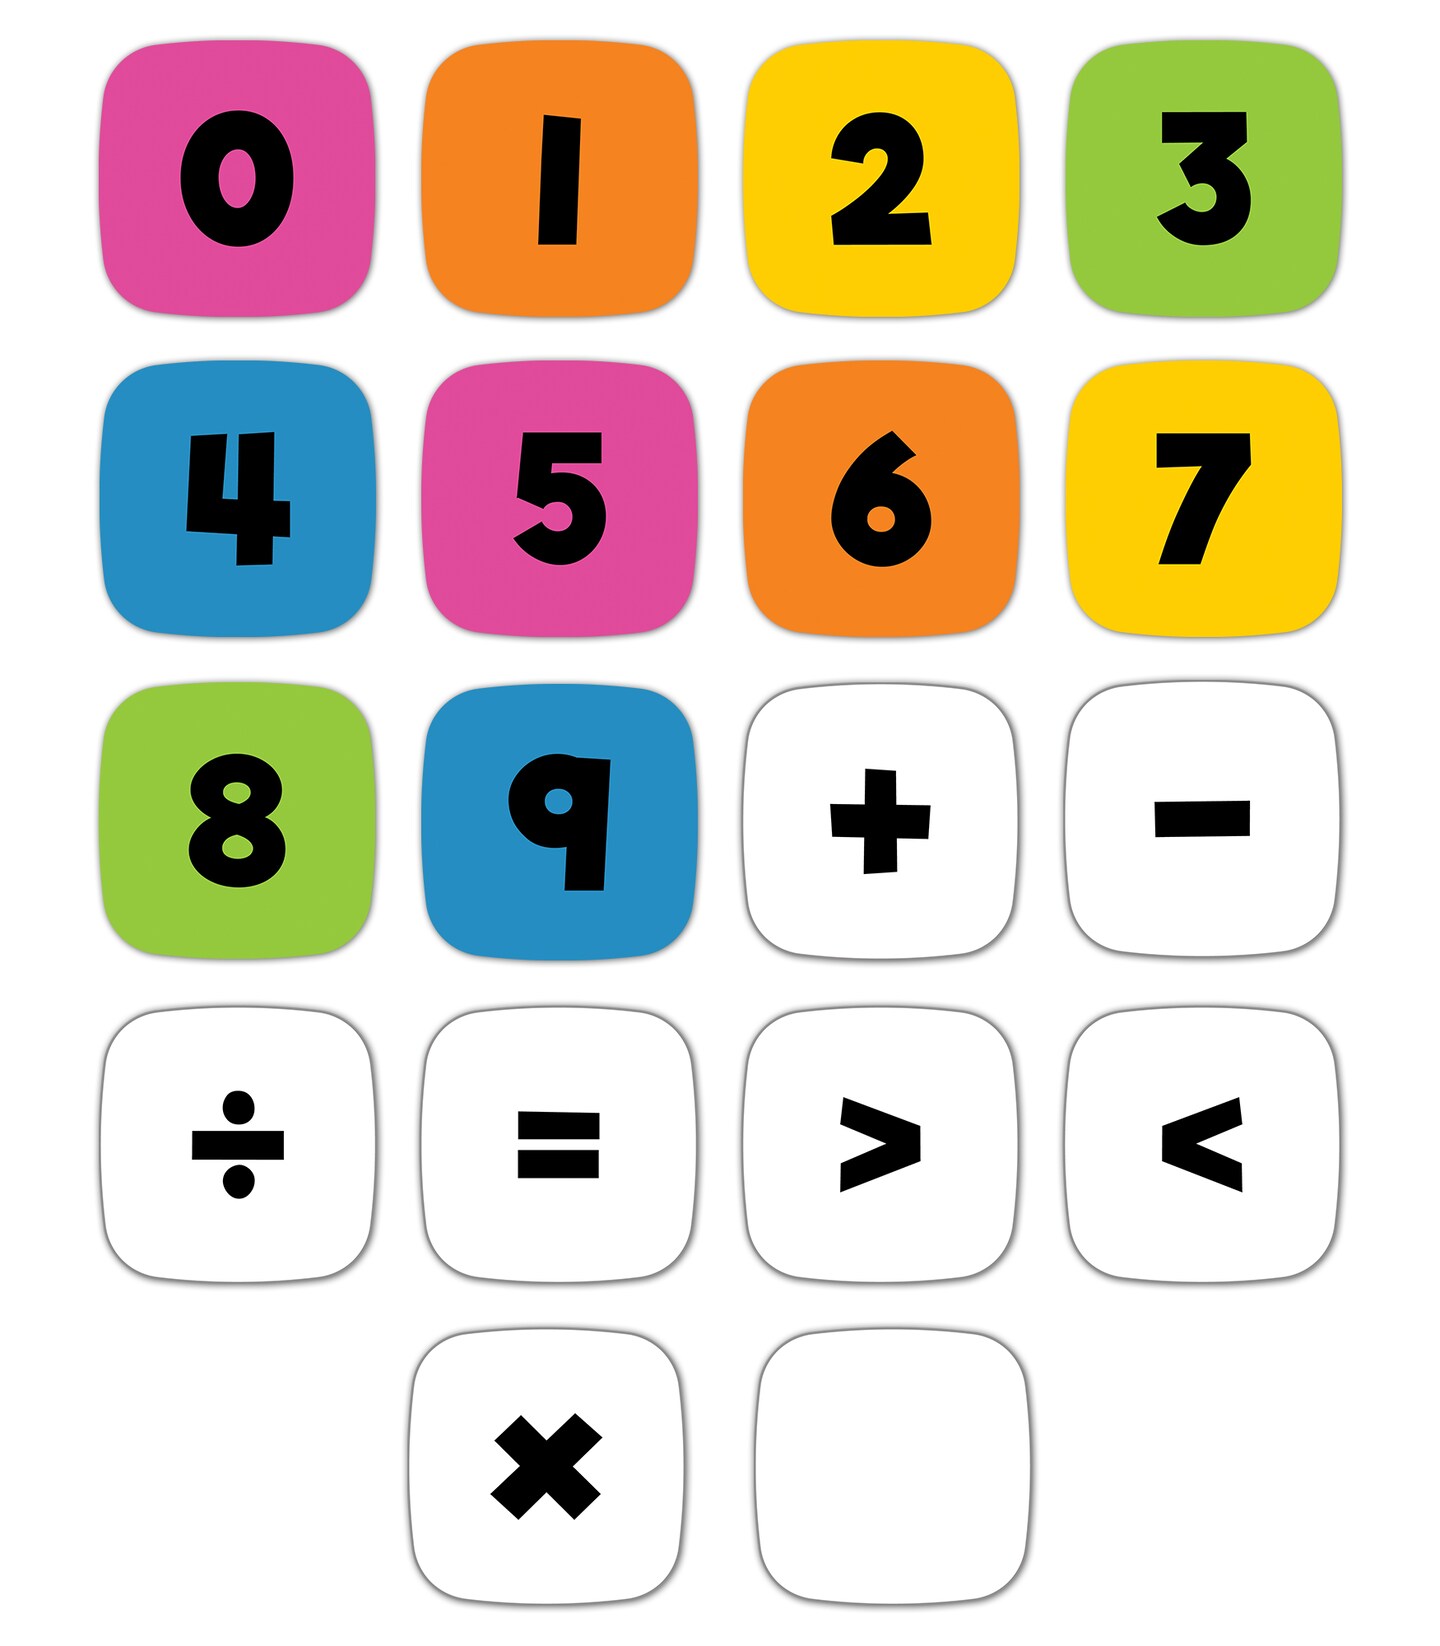 Edu-Clings Silicone Center Numbers and Operations Manipulative&#x2014;Grades K-3 Math Manipulatives With Numbers, Addition, Subtraction, Multiplication, Division, Equal, Greater/Less Than Symbols (30 pc)